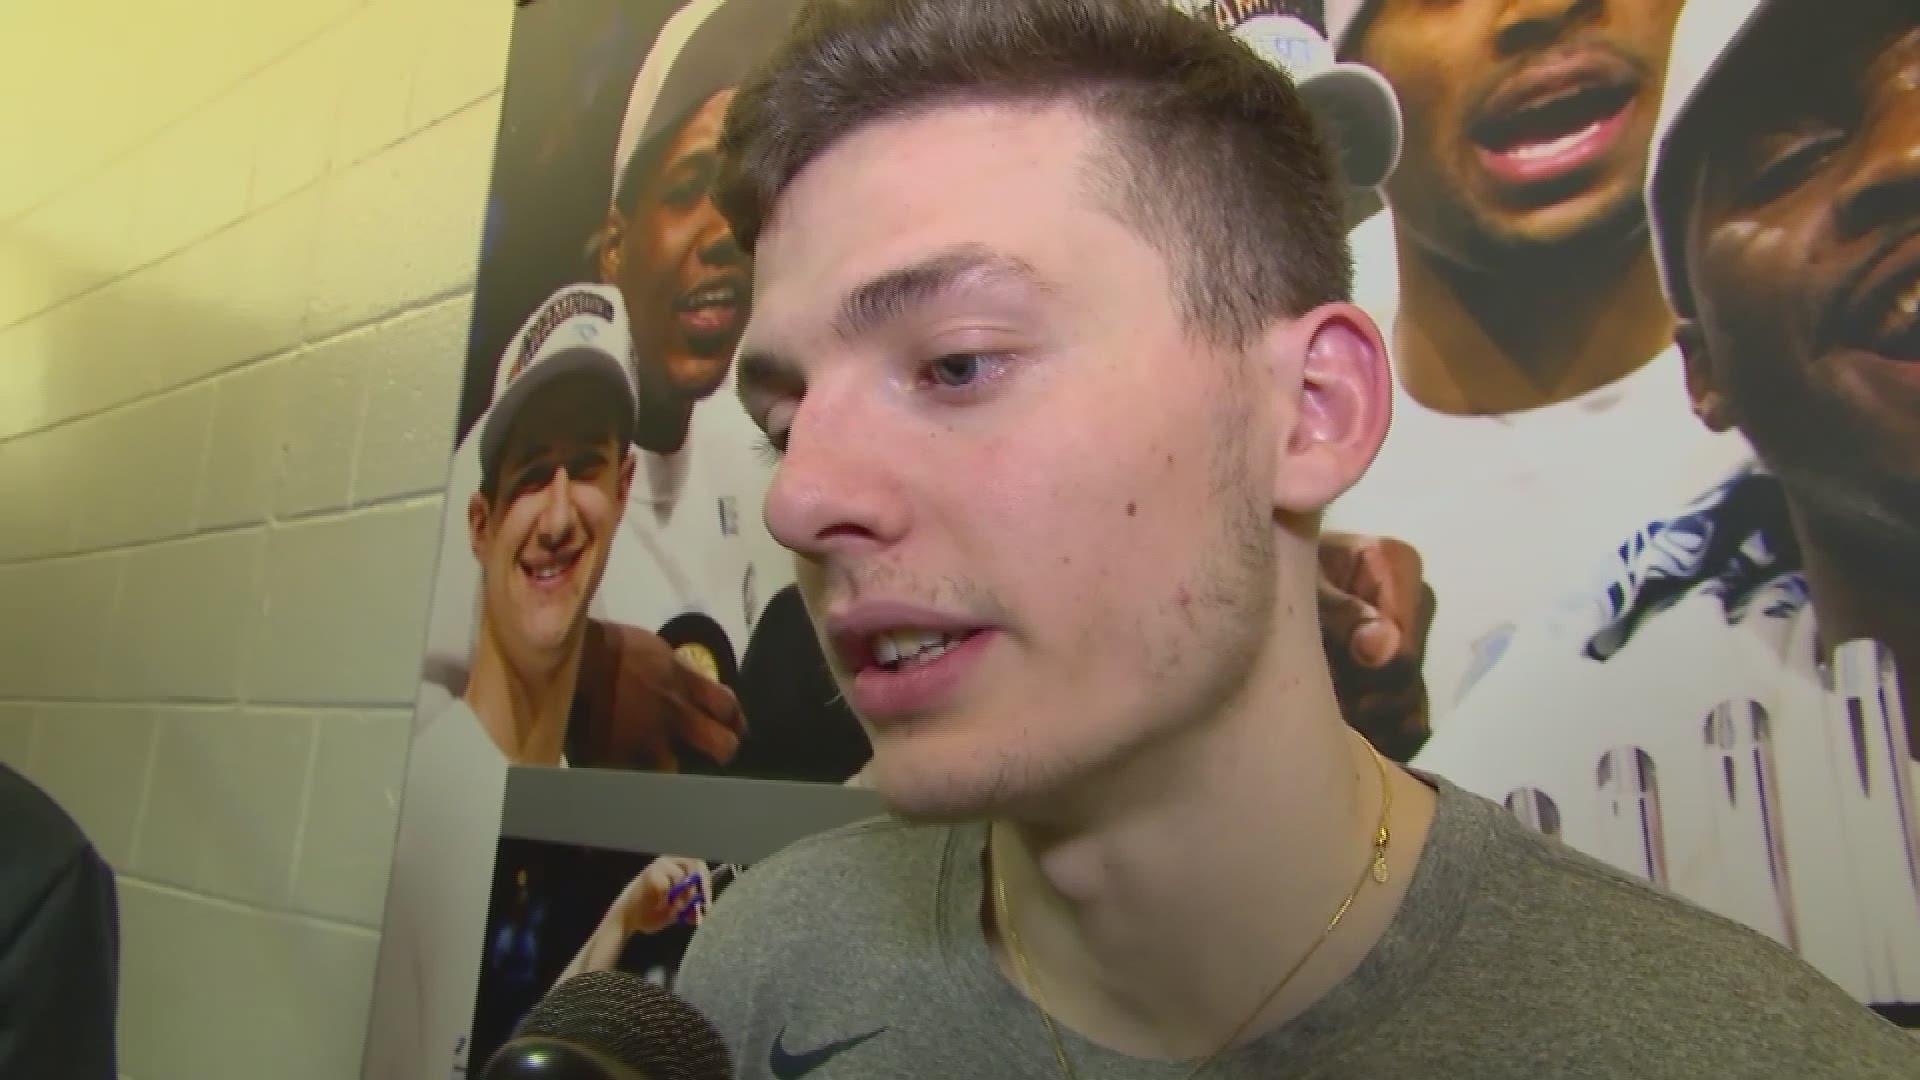 We hear from Kyle Guy, Ty Jerome and Tony Bennett after the Cavaliers rallied to beat the Heels 69-61.